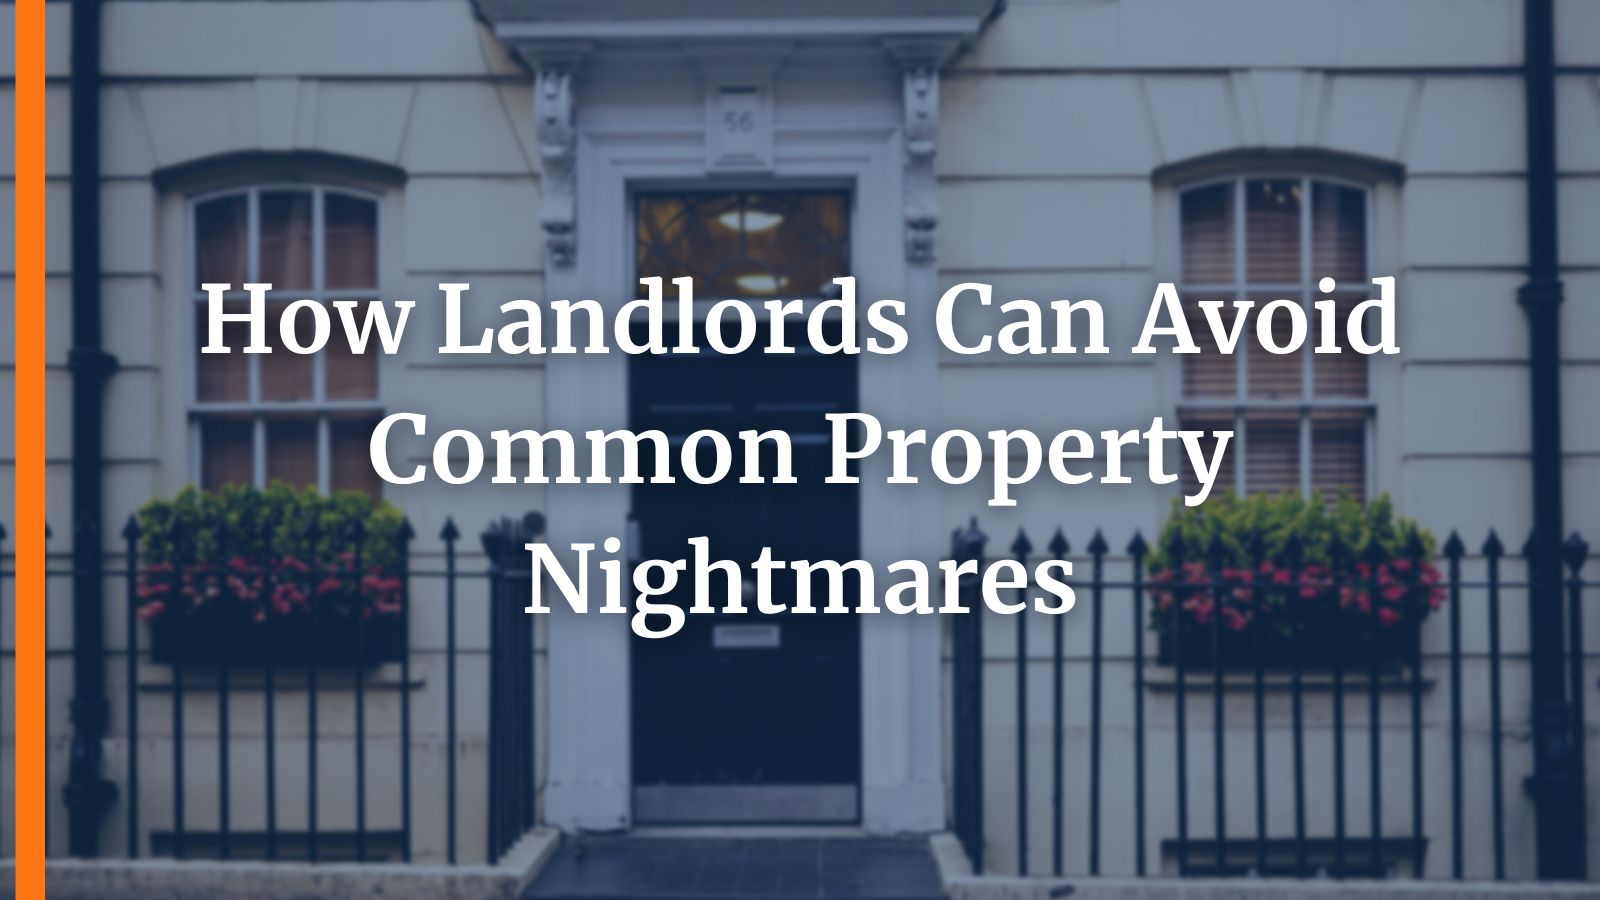 How Landlords Can Avoid Common Property Nightmares